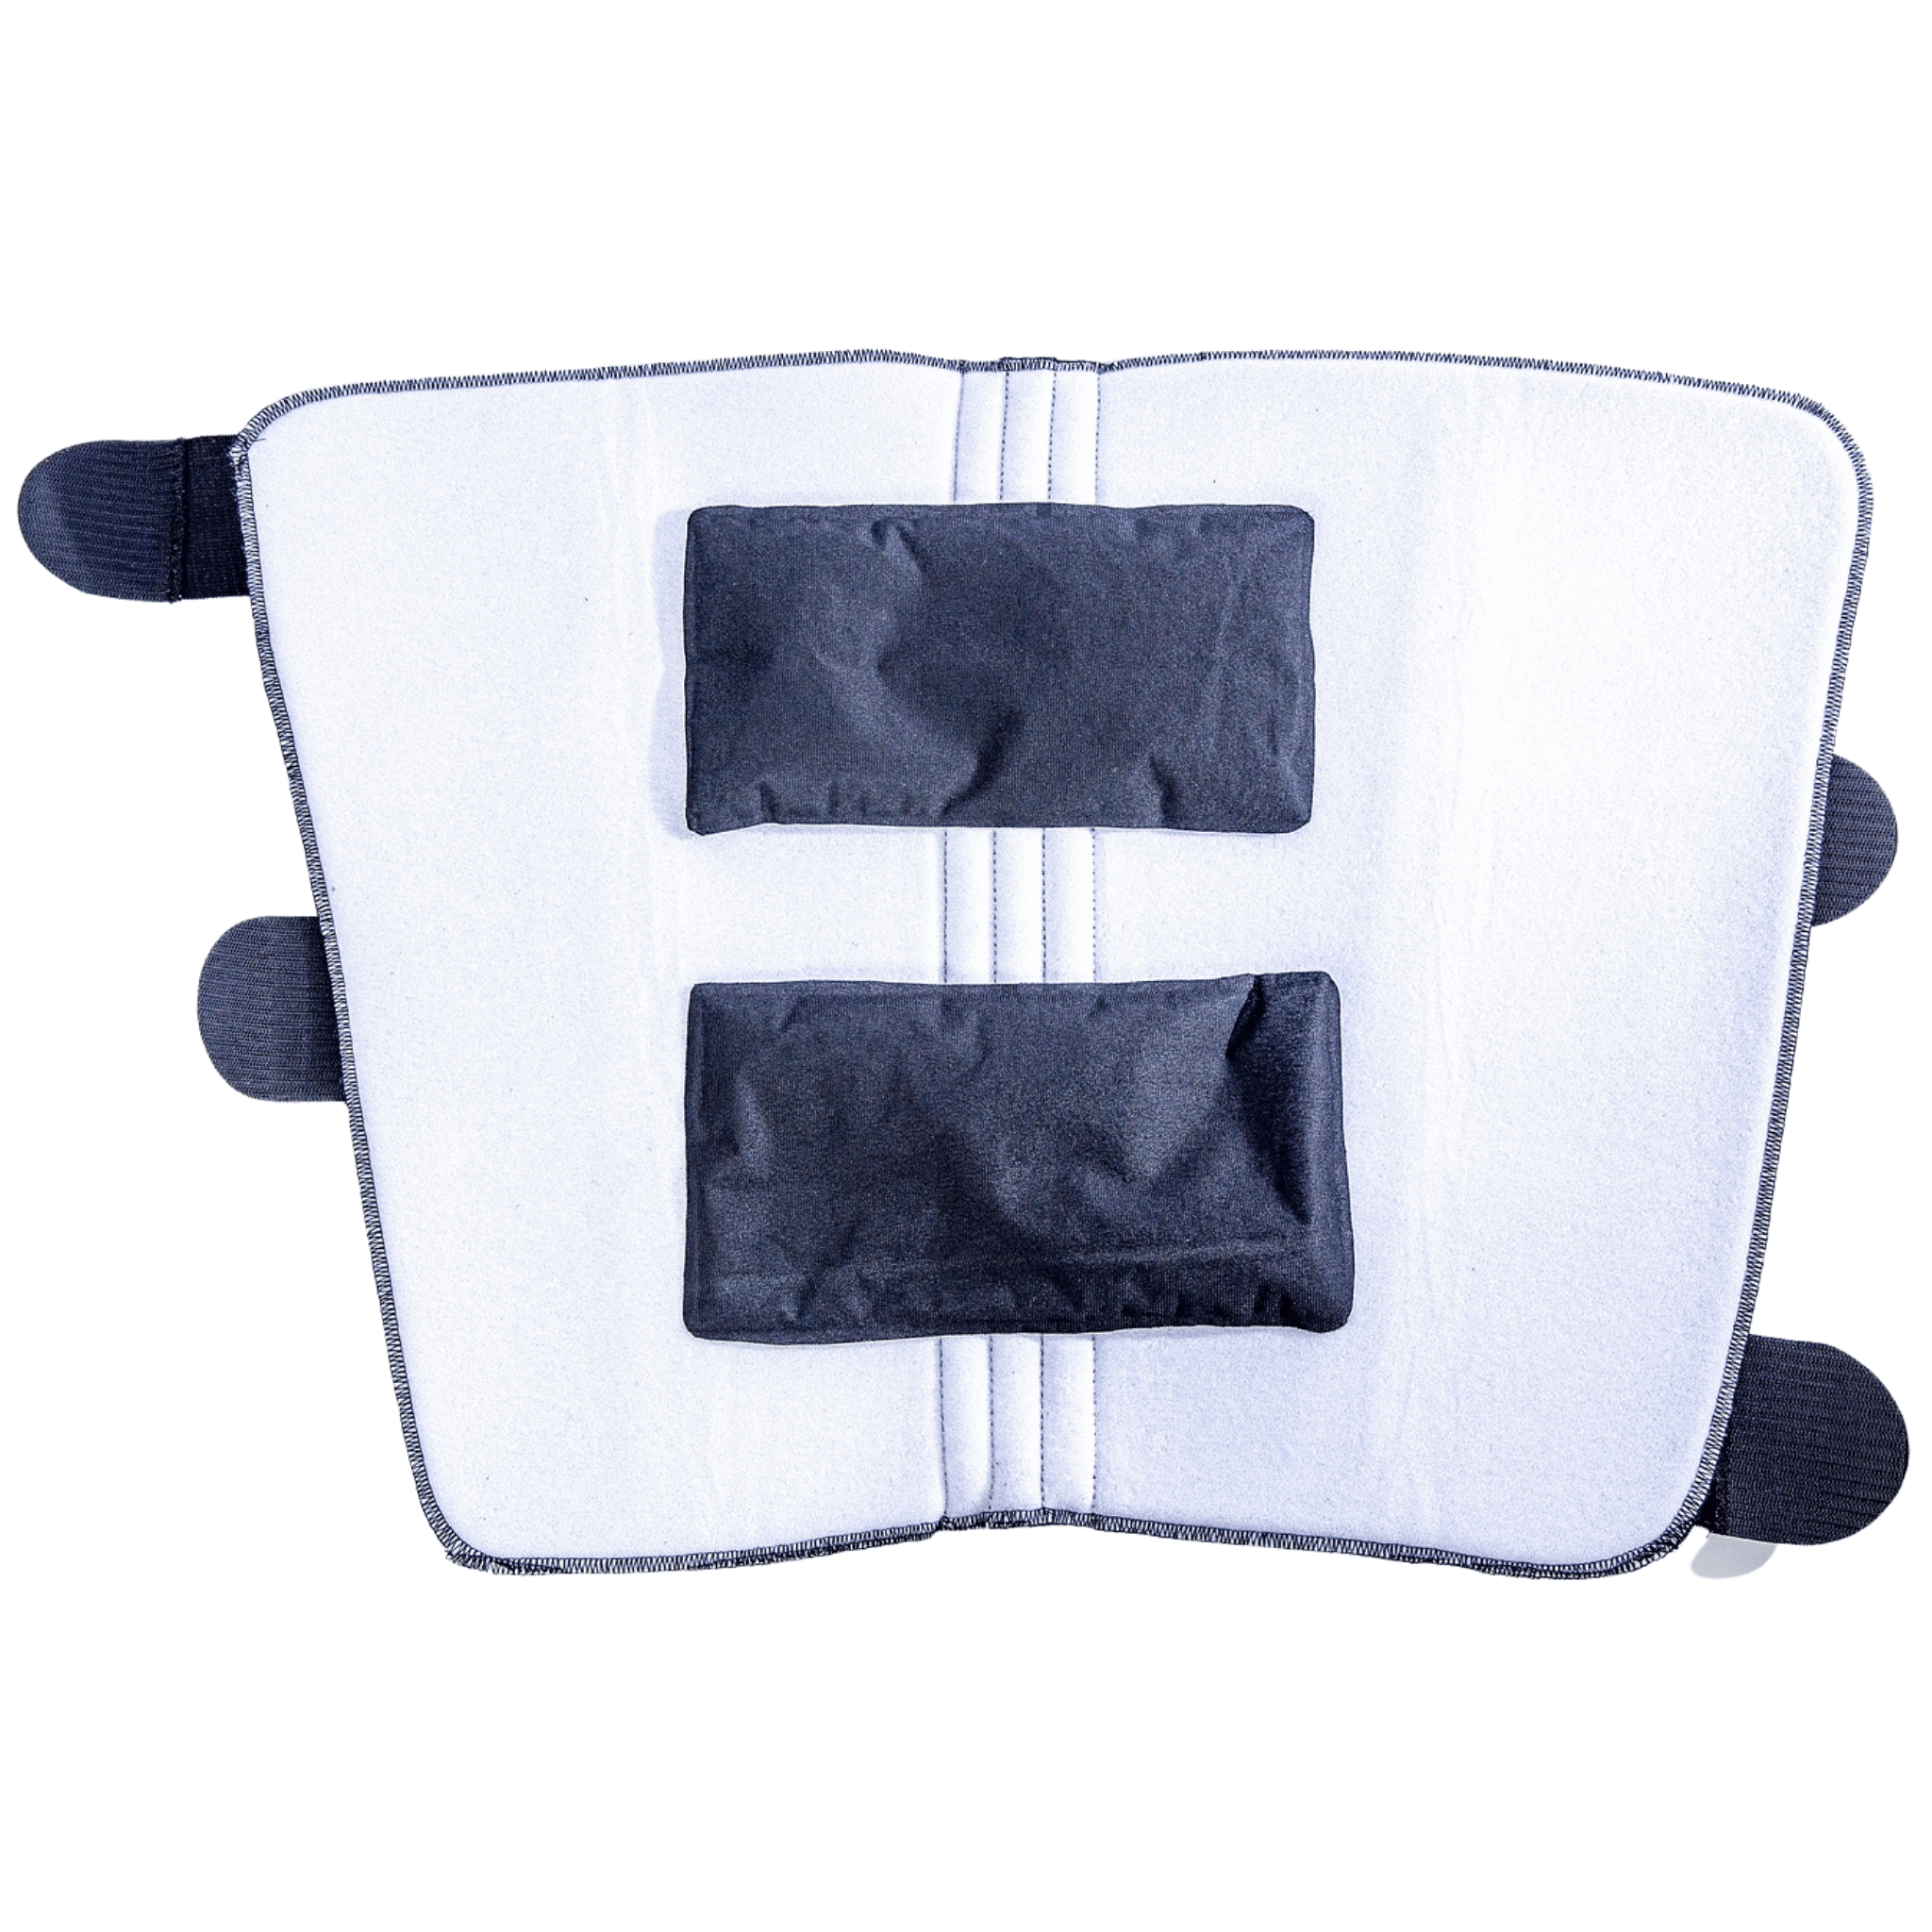 The Knee T Leg Pillow Patented Medical Grade High Back Pain Relief